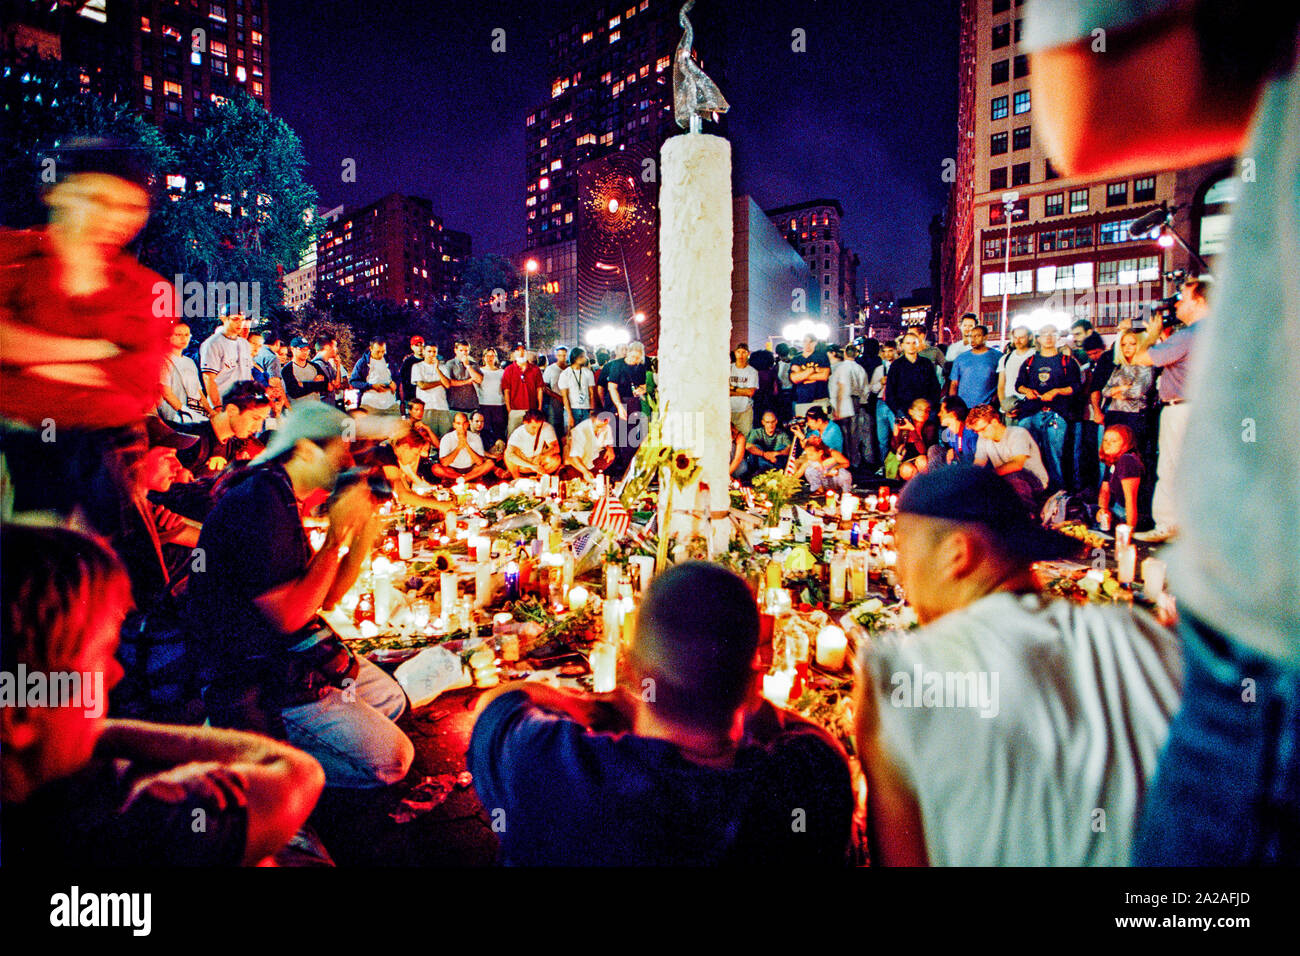 People gathering around a initially spontaneous candle light session that lasts for weeks at Union Square, honoring the killed in the WTC bombing and asking for peace... Stock Photo